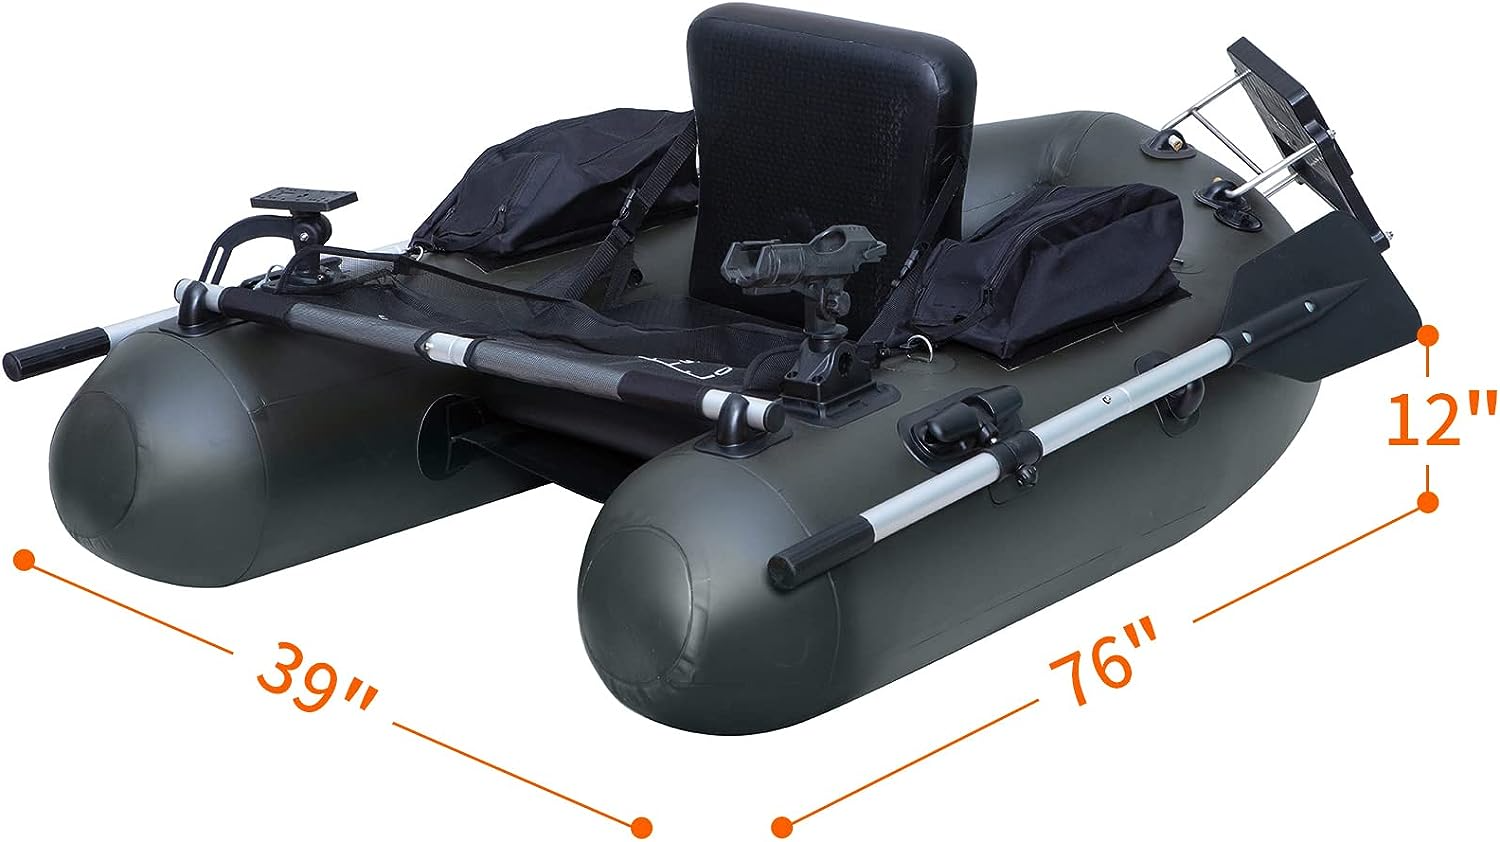 Byhsports Professional Inflatable Boat! 🎣